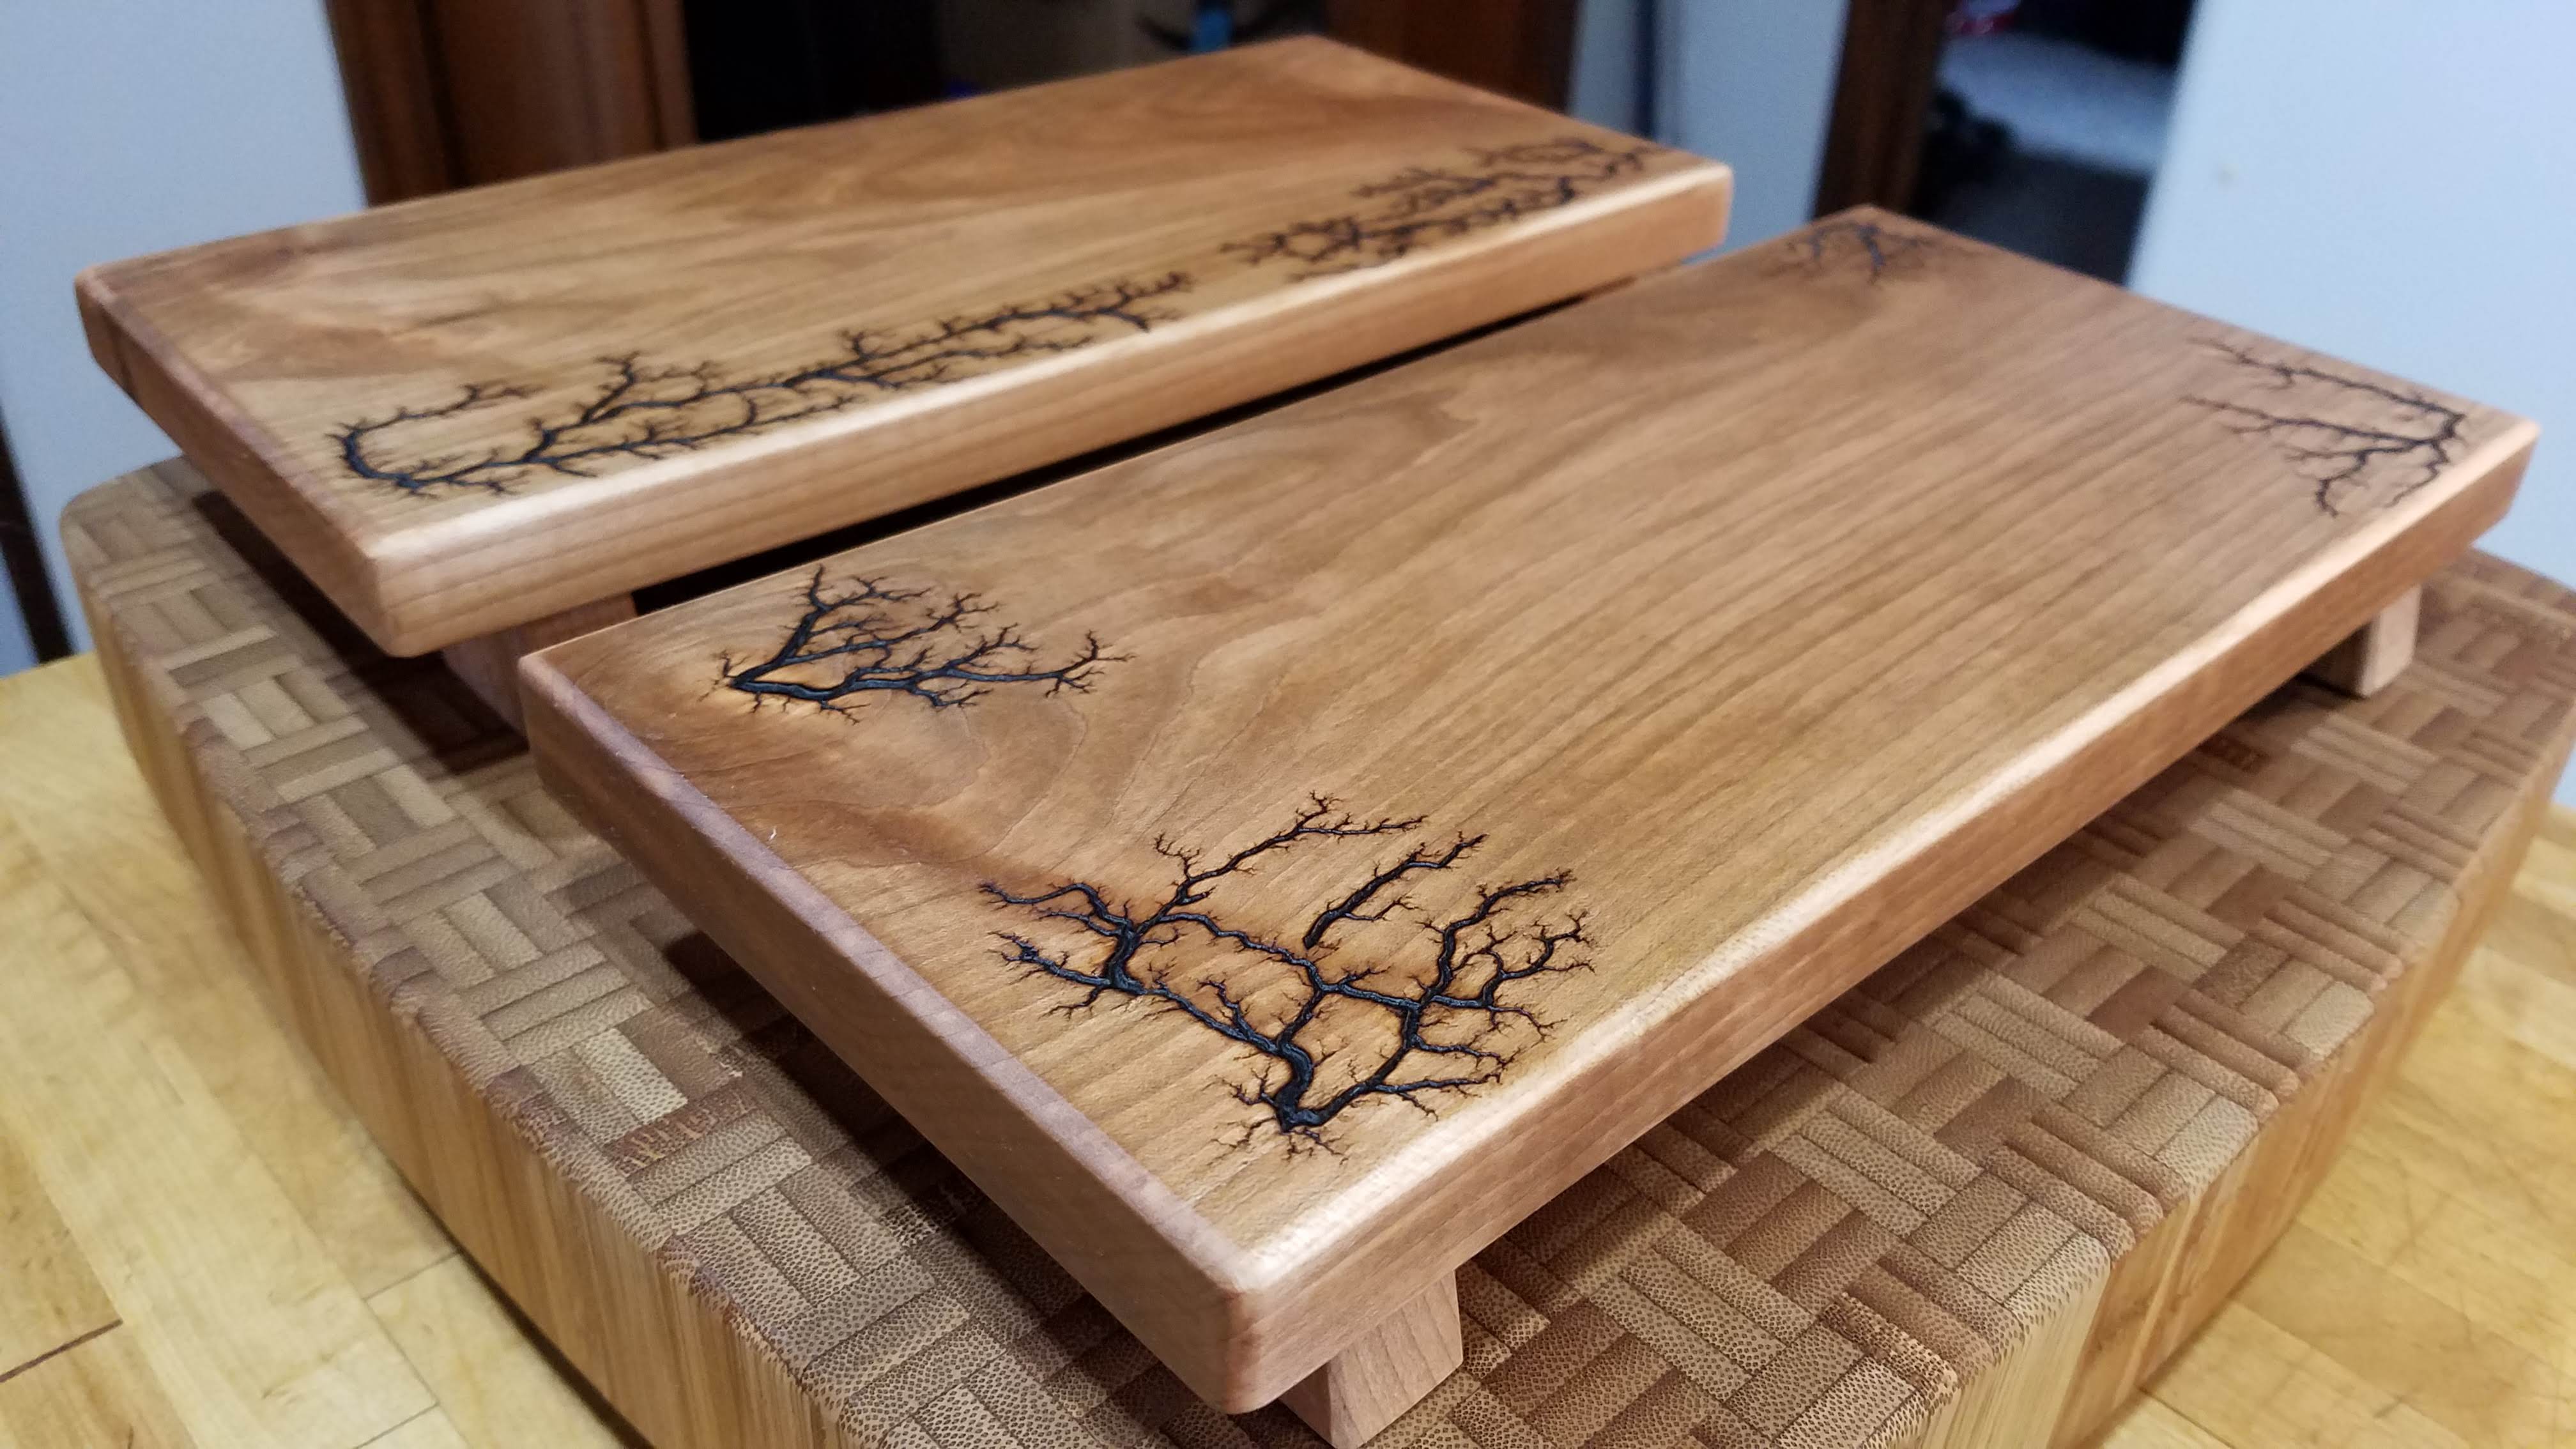 Sushi or Charcuterie serving board (Made-to-Order)